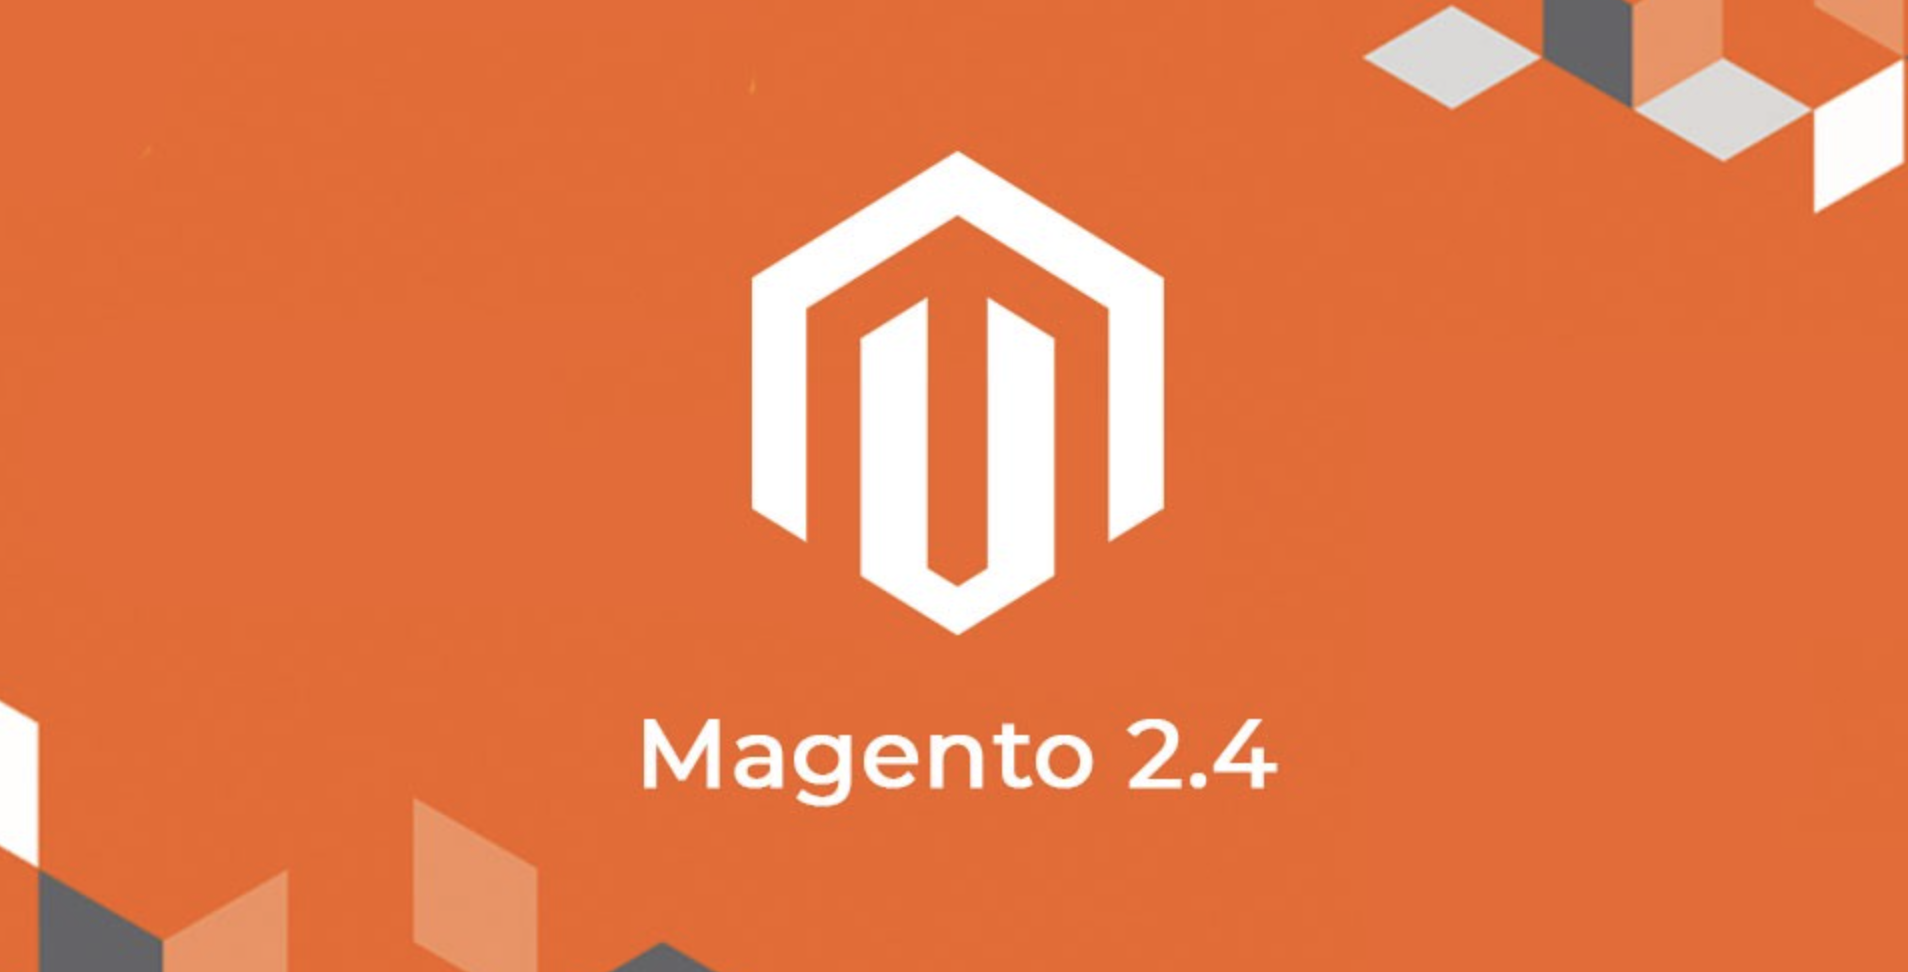 What is new in Magento 2.4